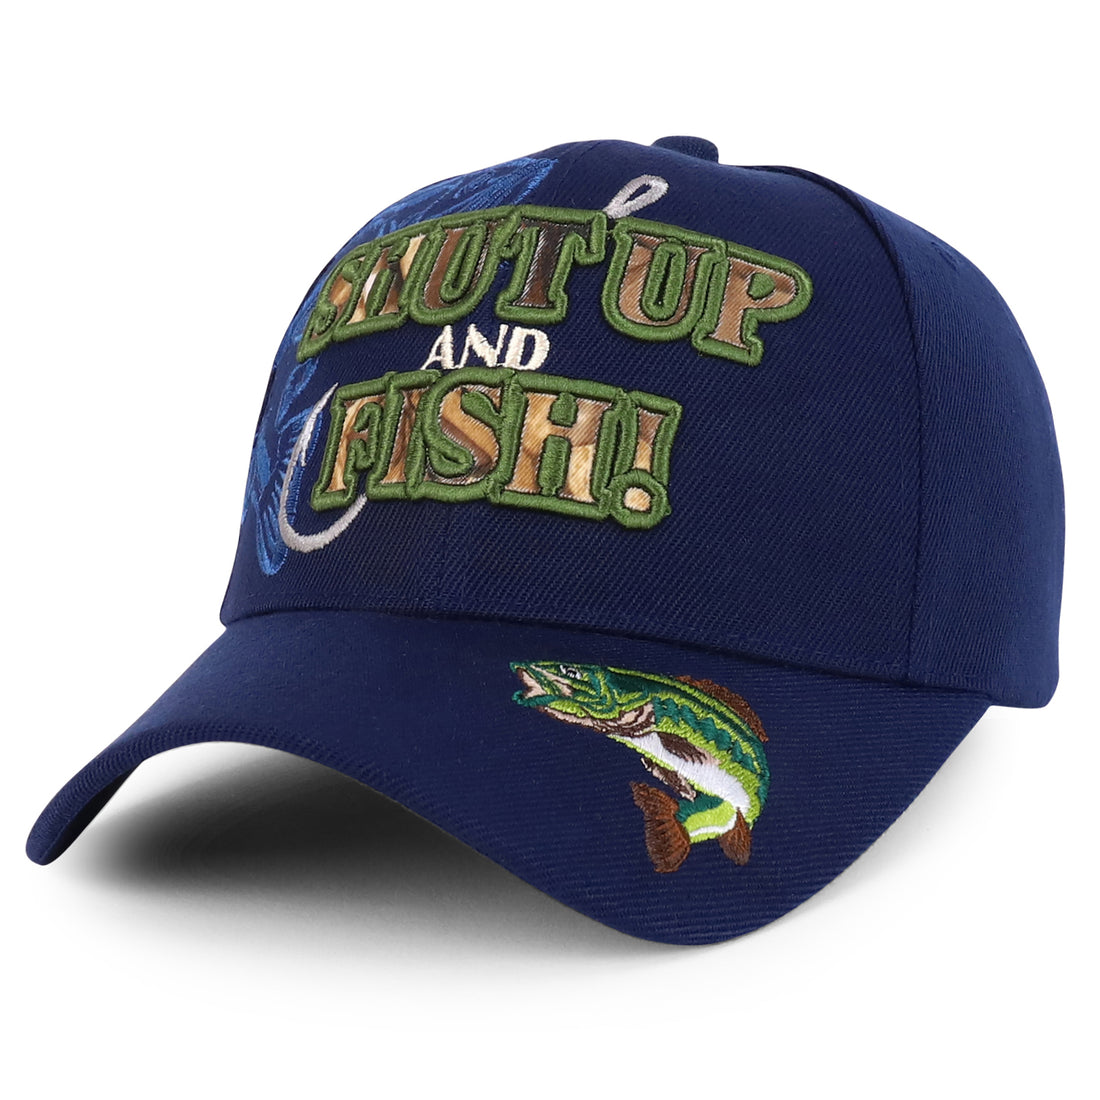 Shut Up and Fish with Bass and Hook Embroidered Structured Baseball Cap